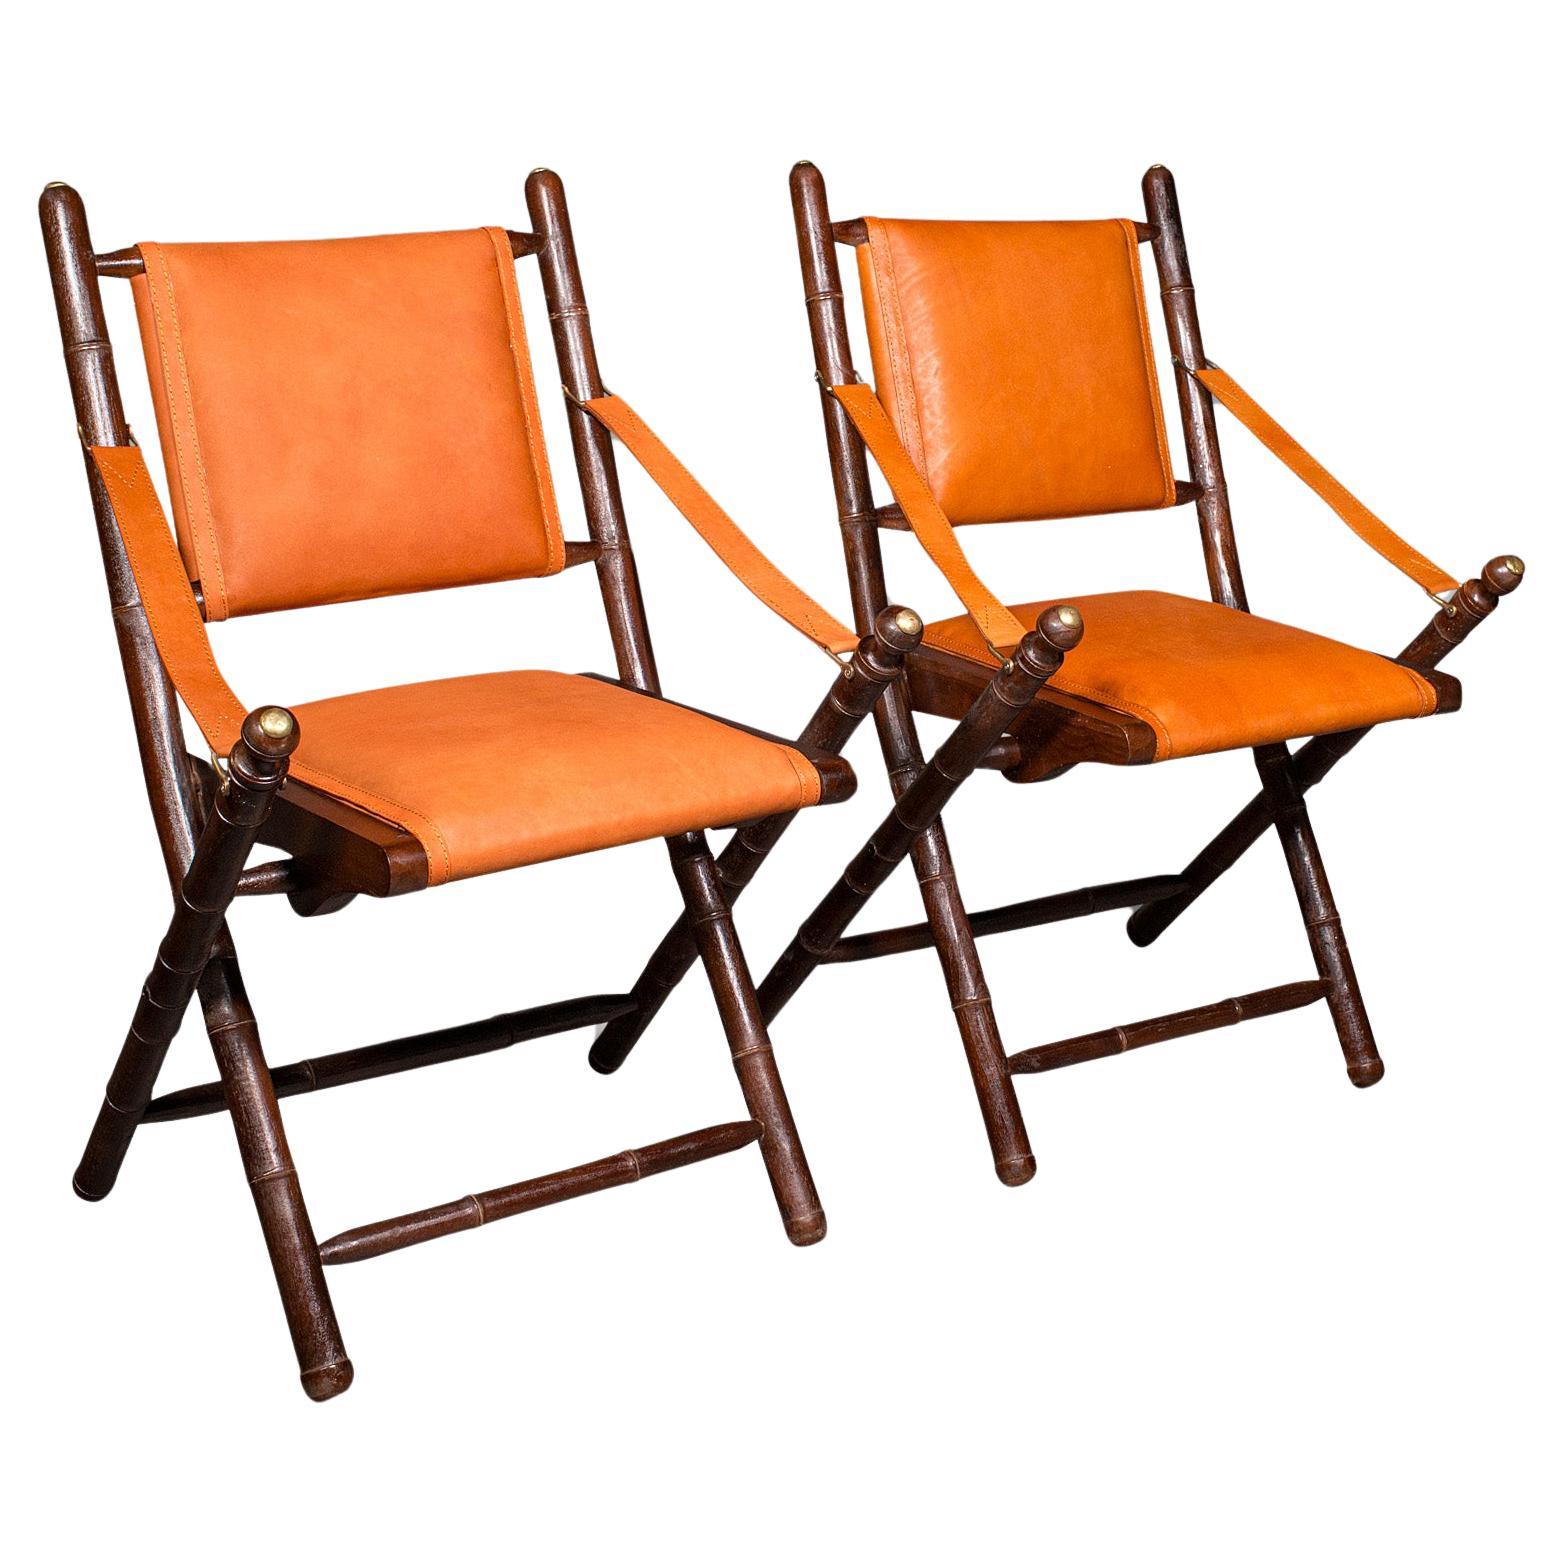 Pair Of Contemporary Orangery Chairs, English, Leather, Veranda, Patio, Seat For Sale